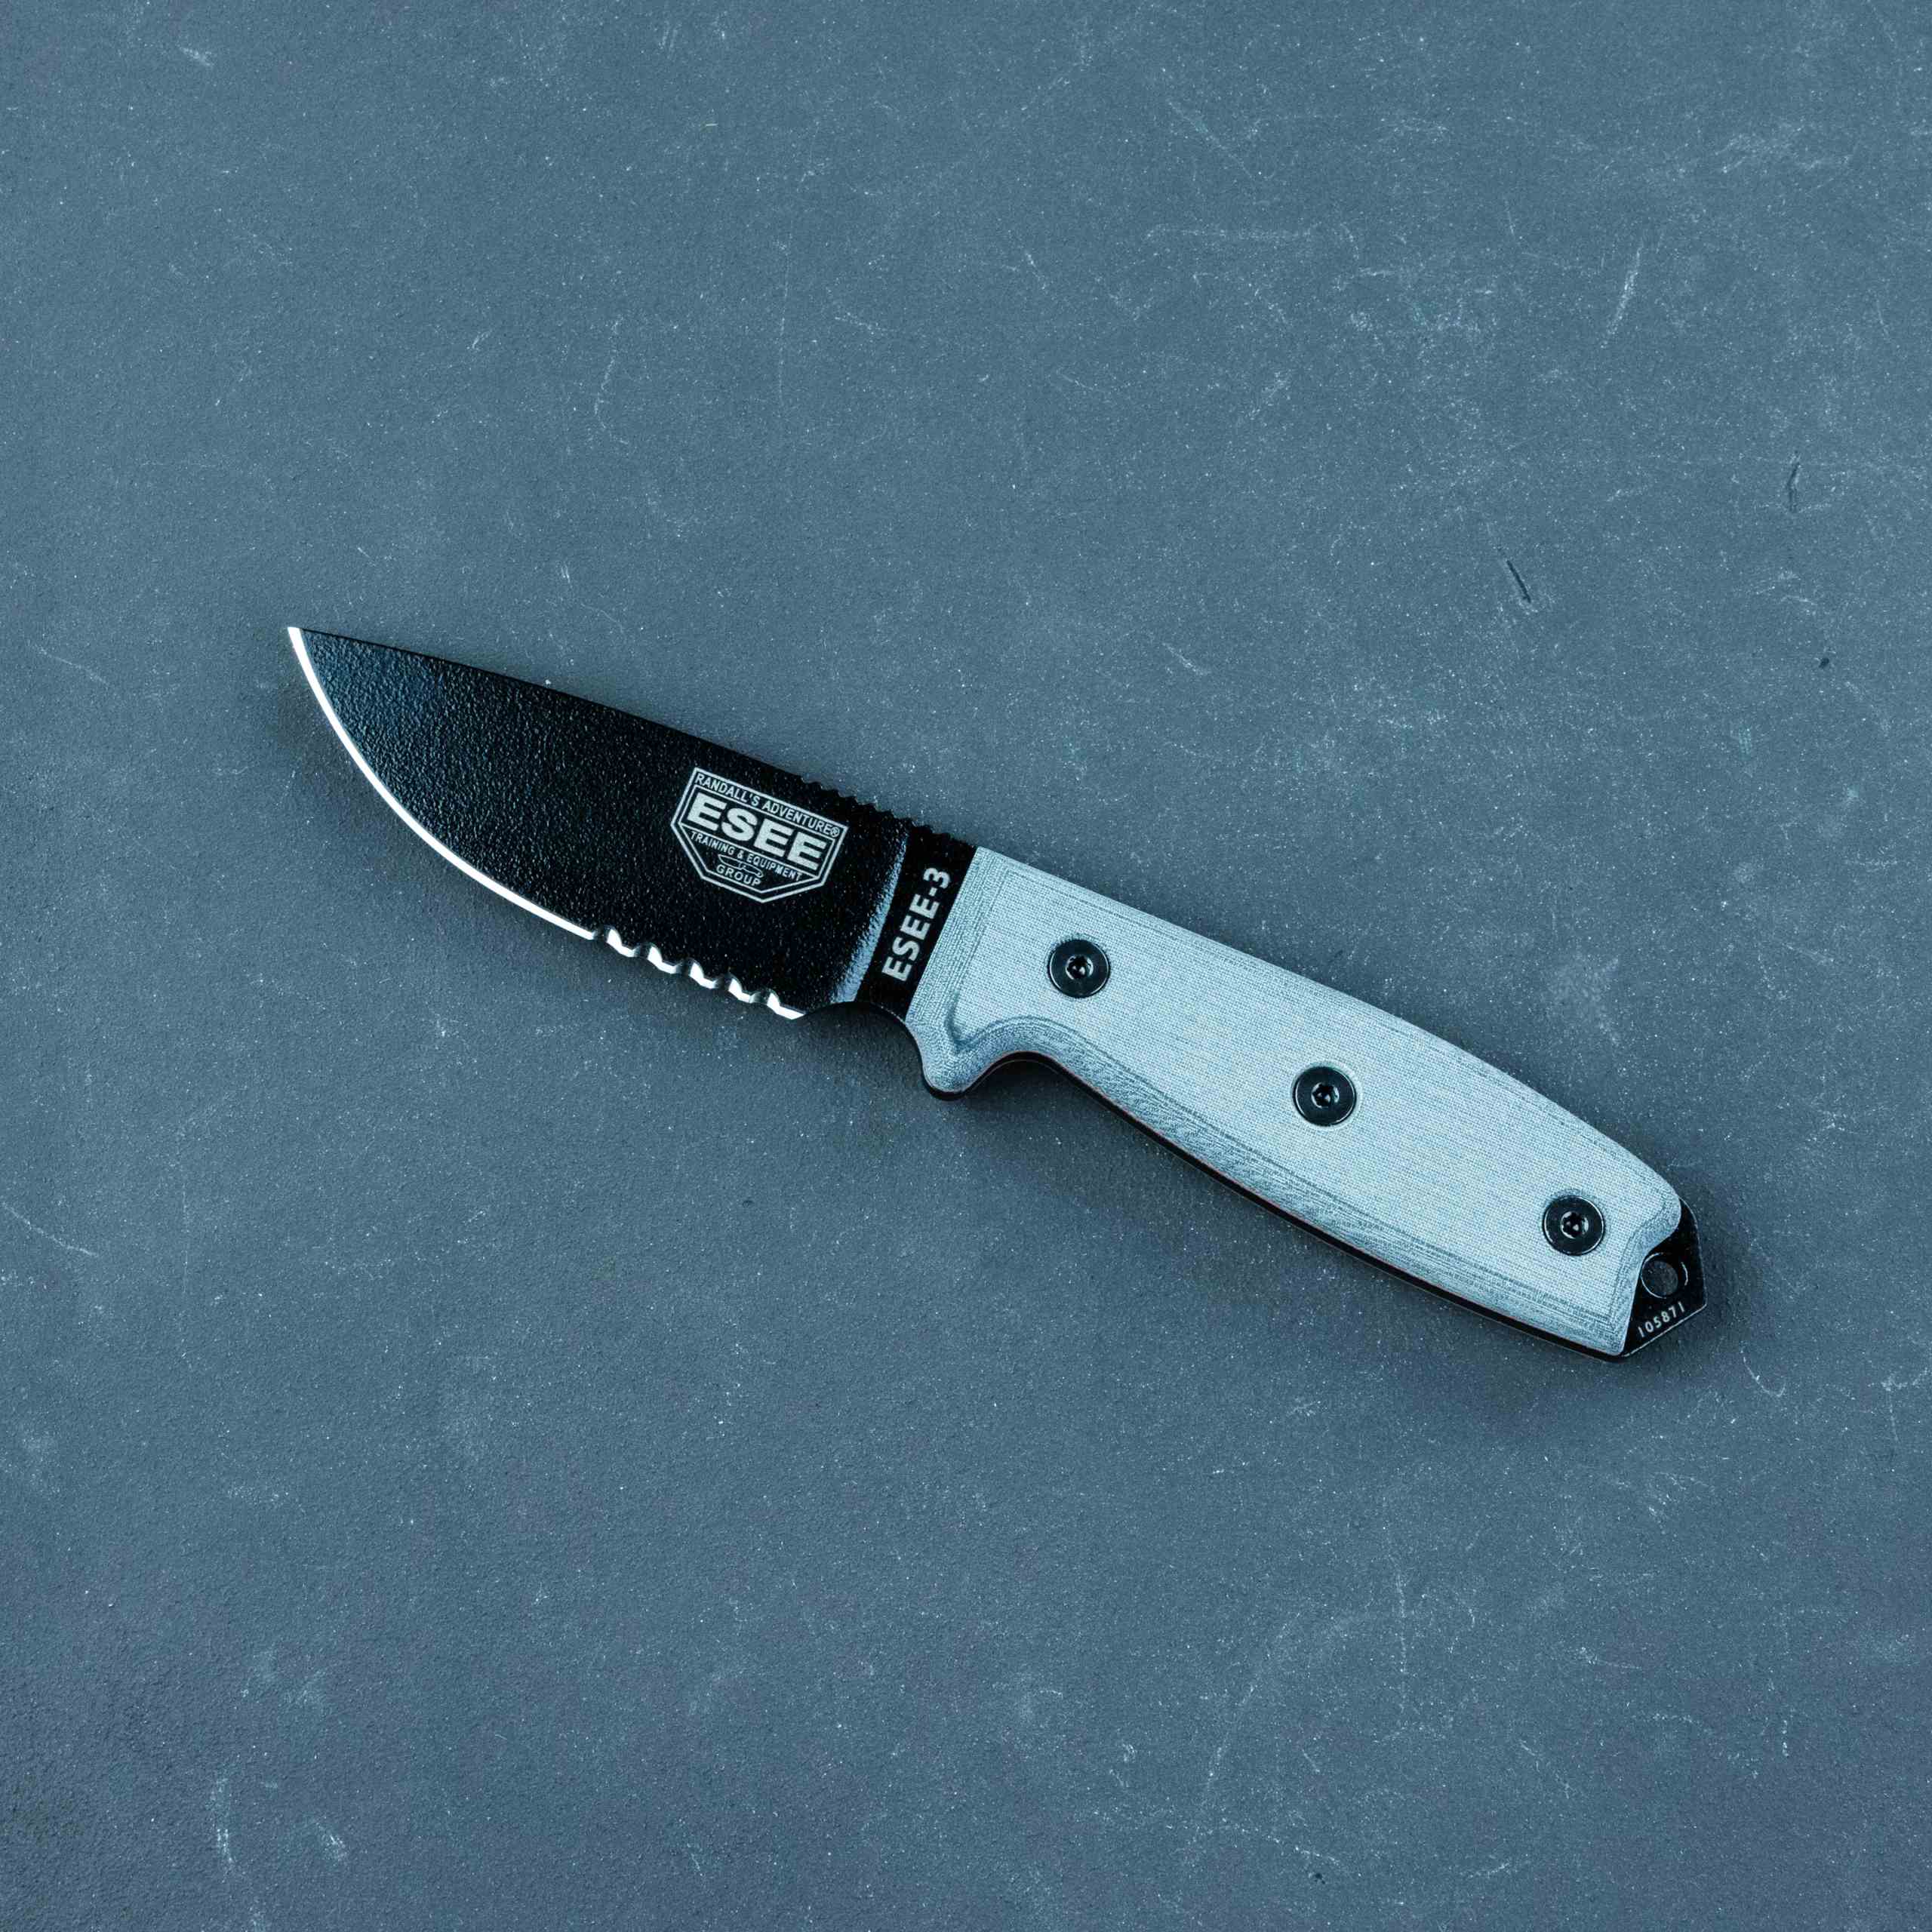  ESEE Knives 4P Fixed Blade Knife w/Handle and Molded